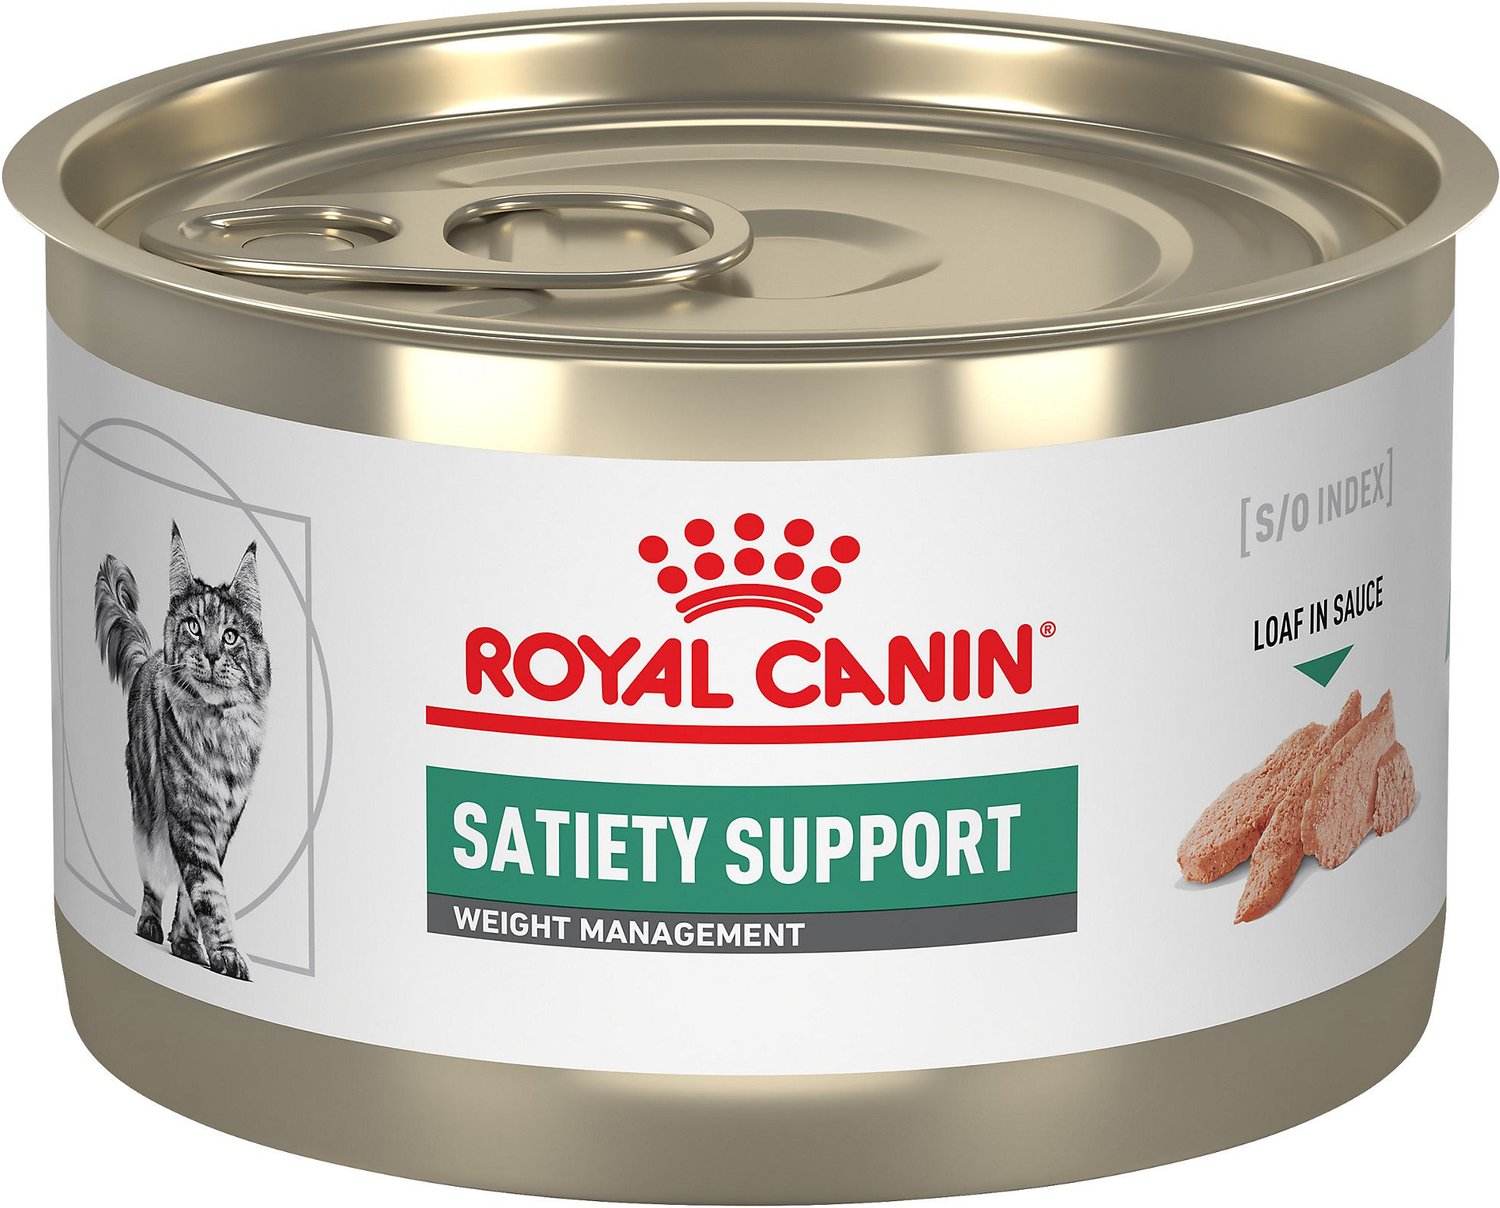 ROYAL CANIN VETERINARY DIET Adult Weight Management in Sauce Canned Cat Food, 5.1-oz, case of 24 - Chewy.com